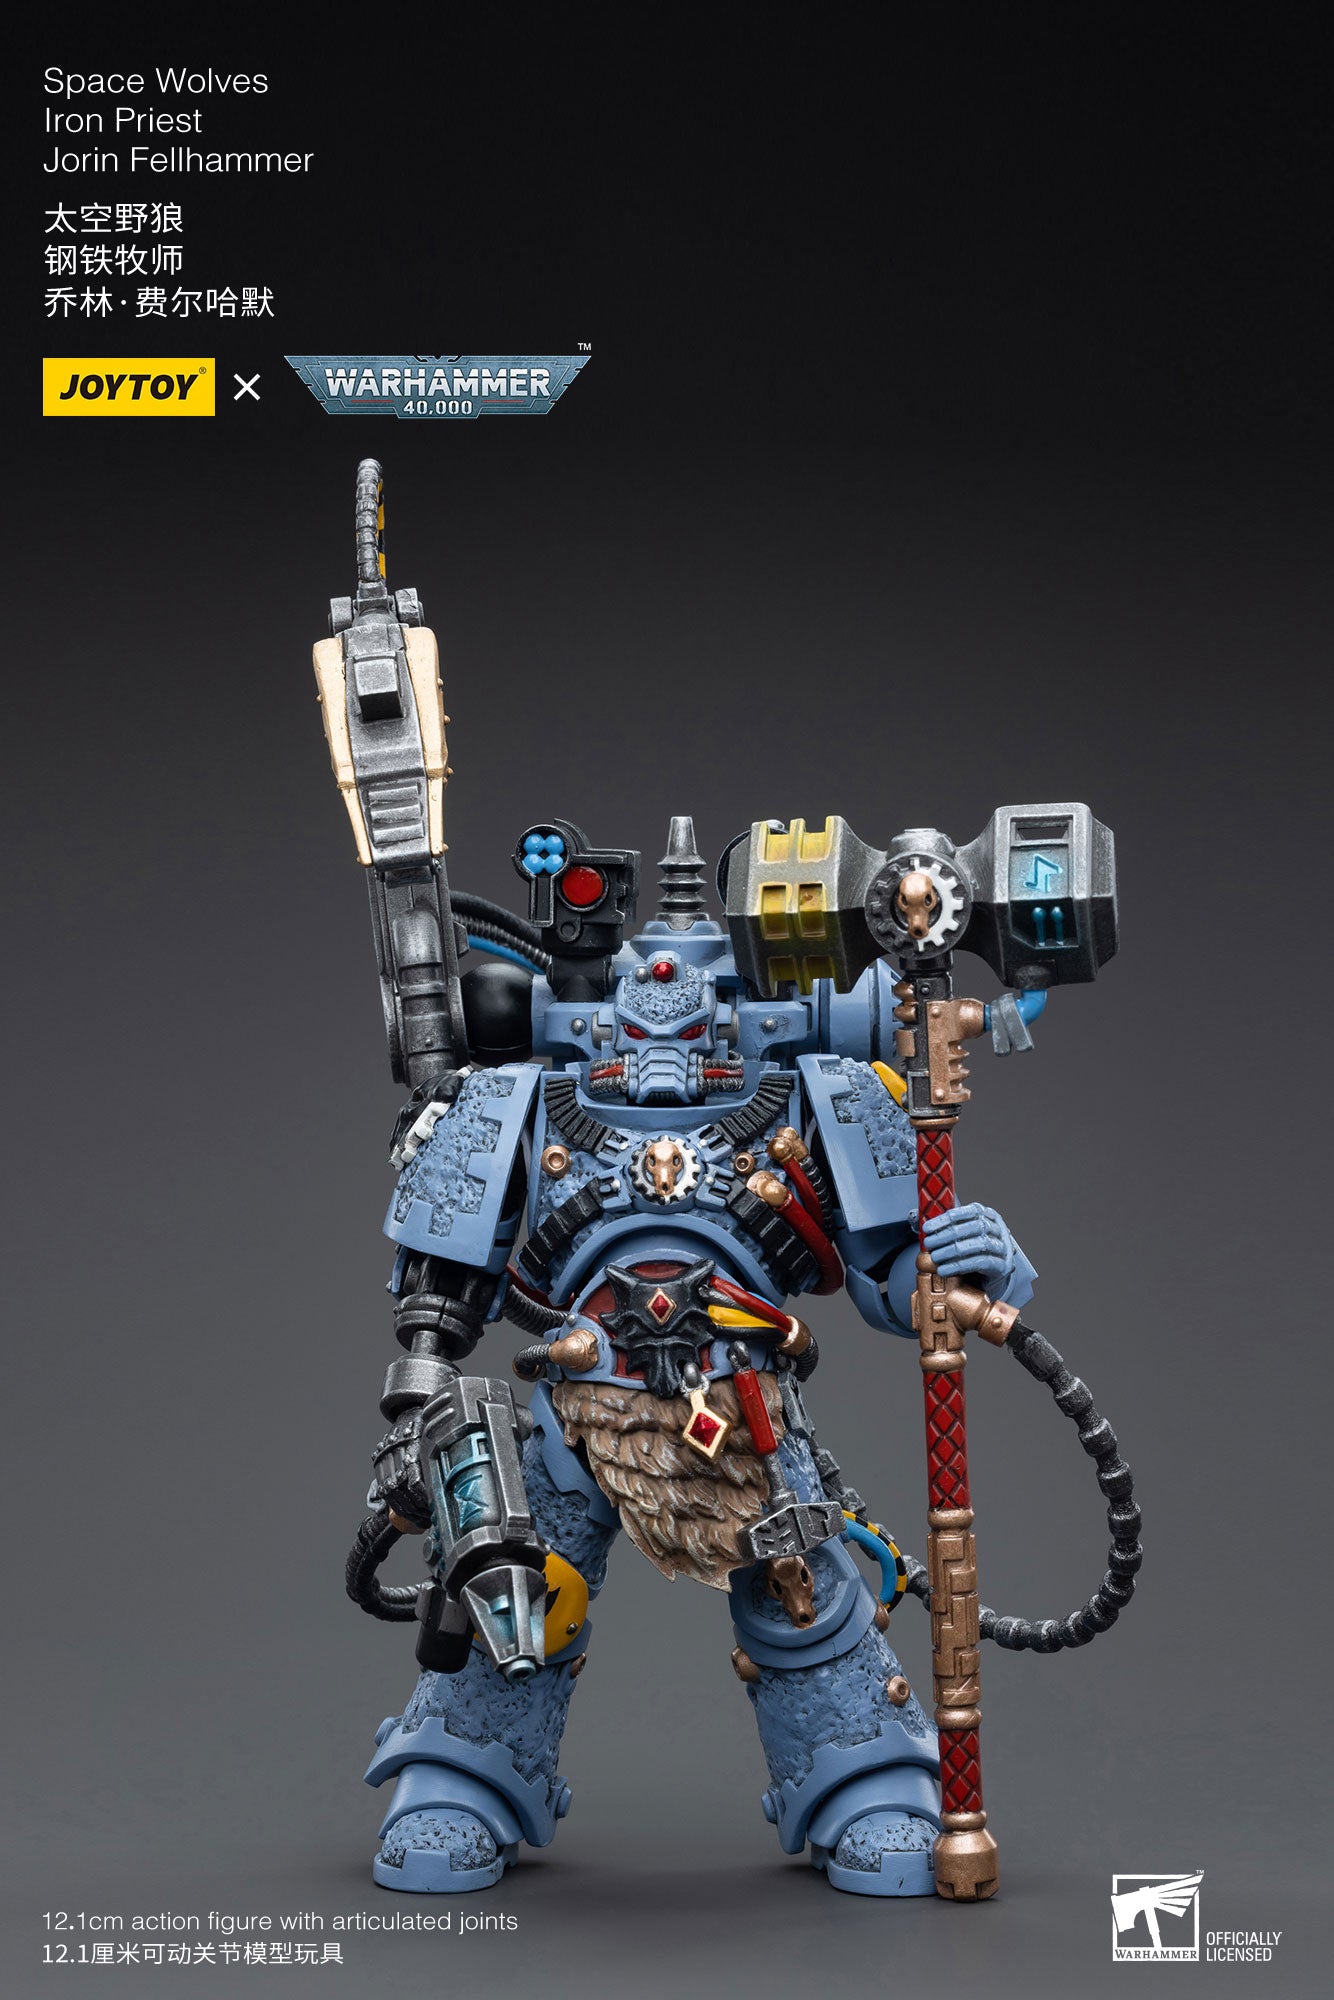 Space Wolves Iron Priest Jorin Fellhammer - Action Figure By JOYTOY